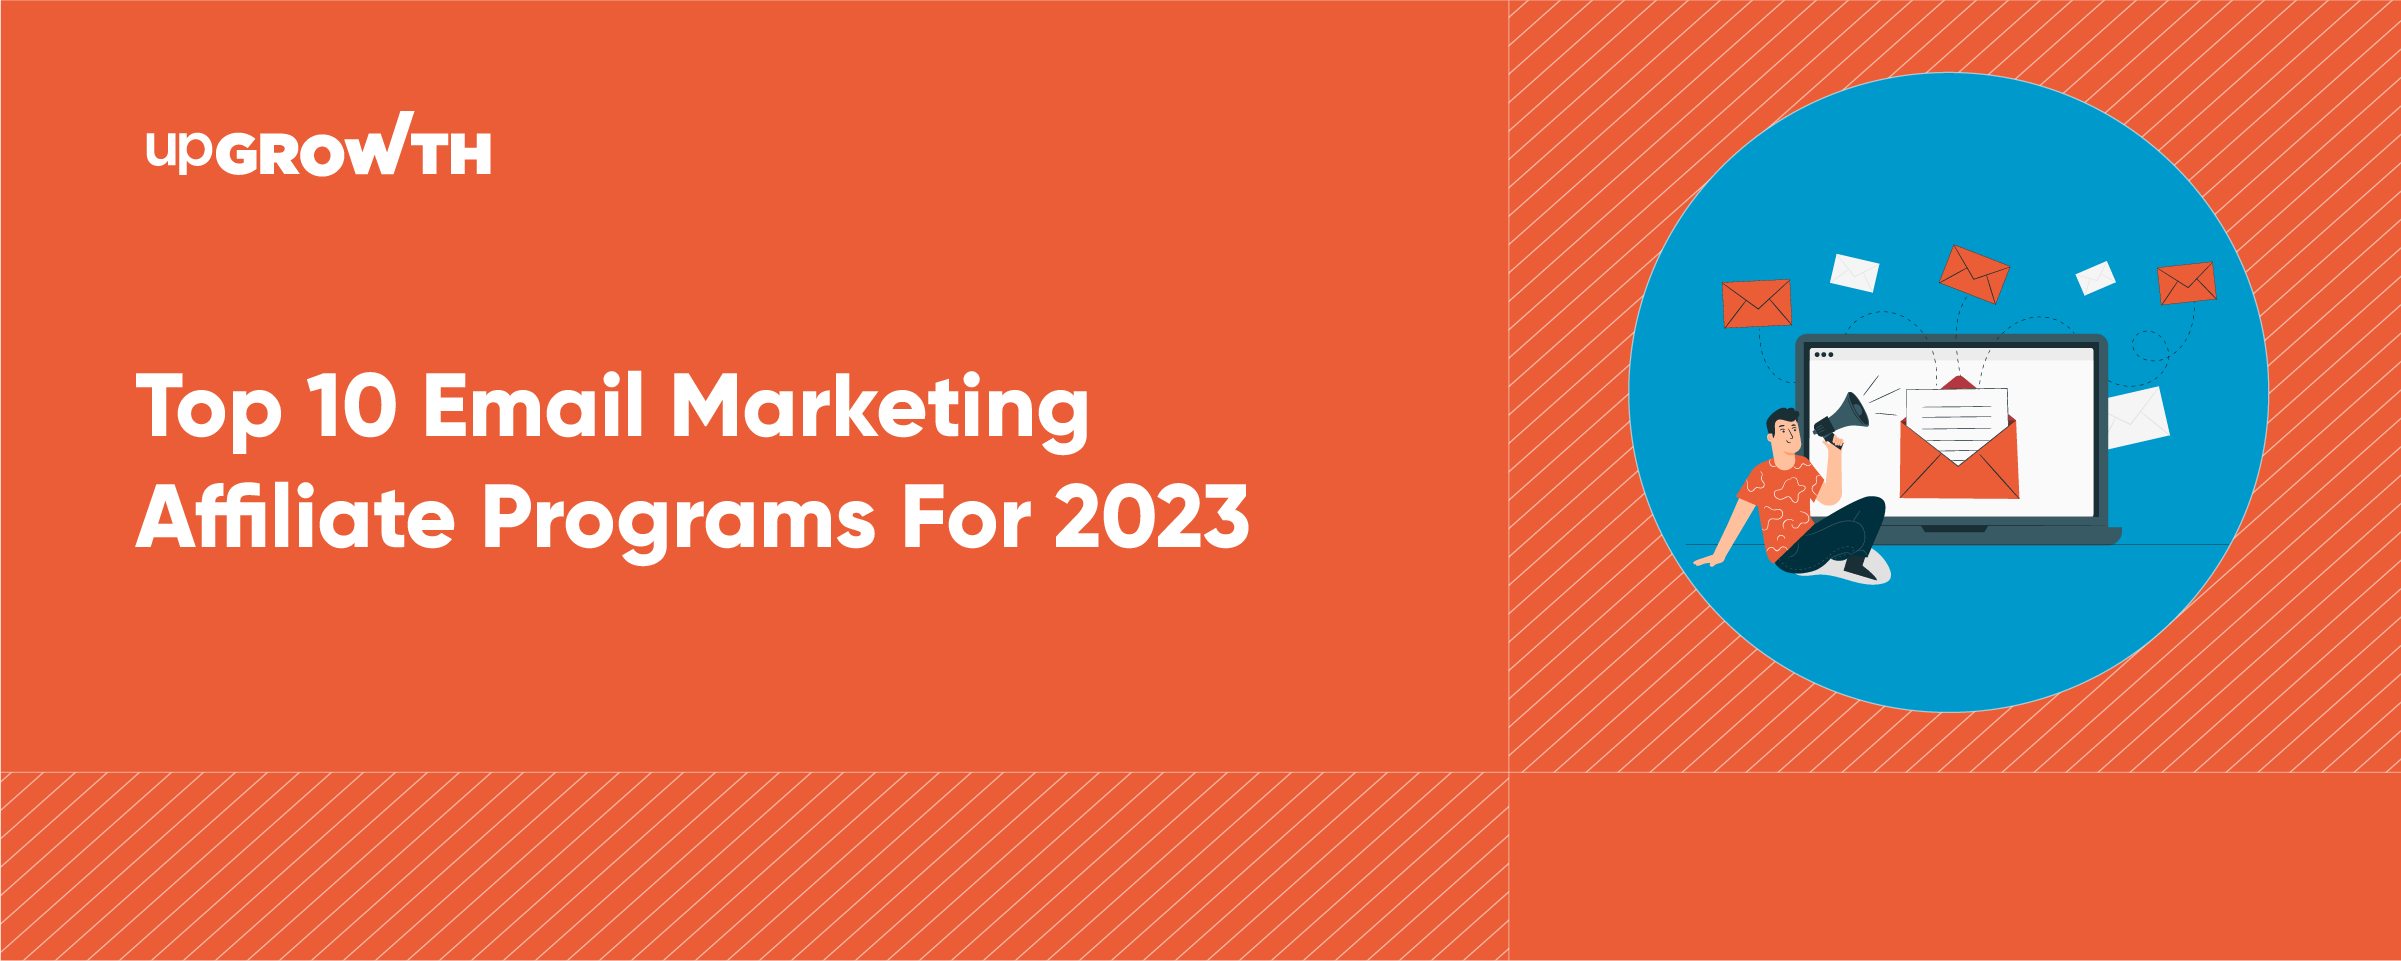 Top 10 Email Marketing Affiliate Programs For 2023